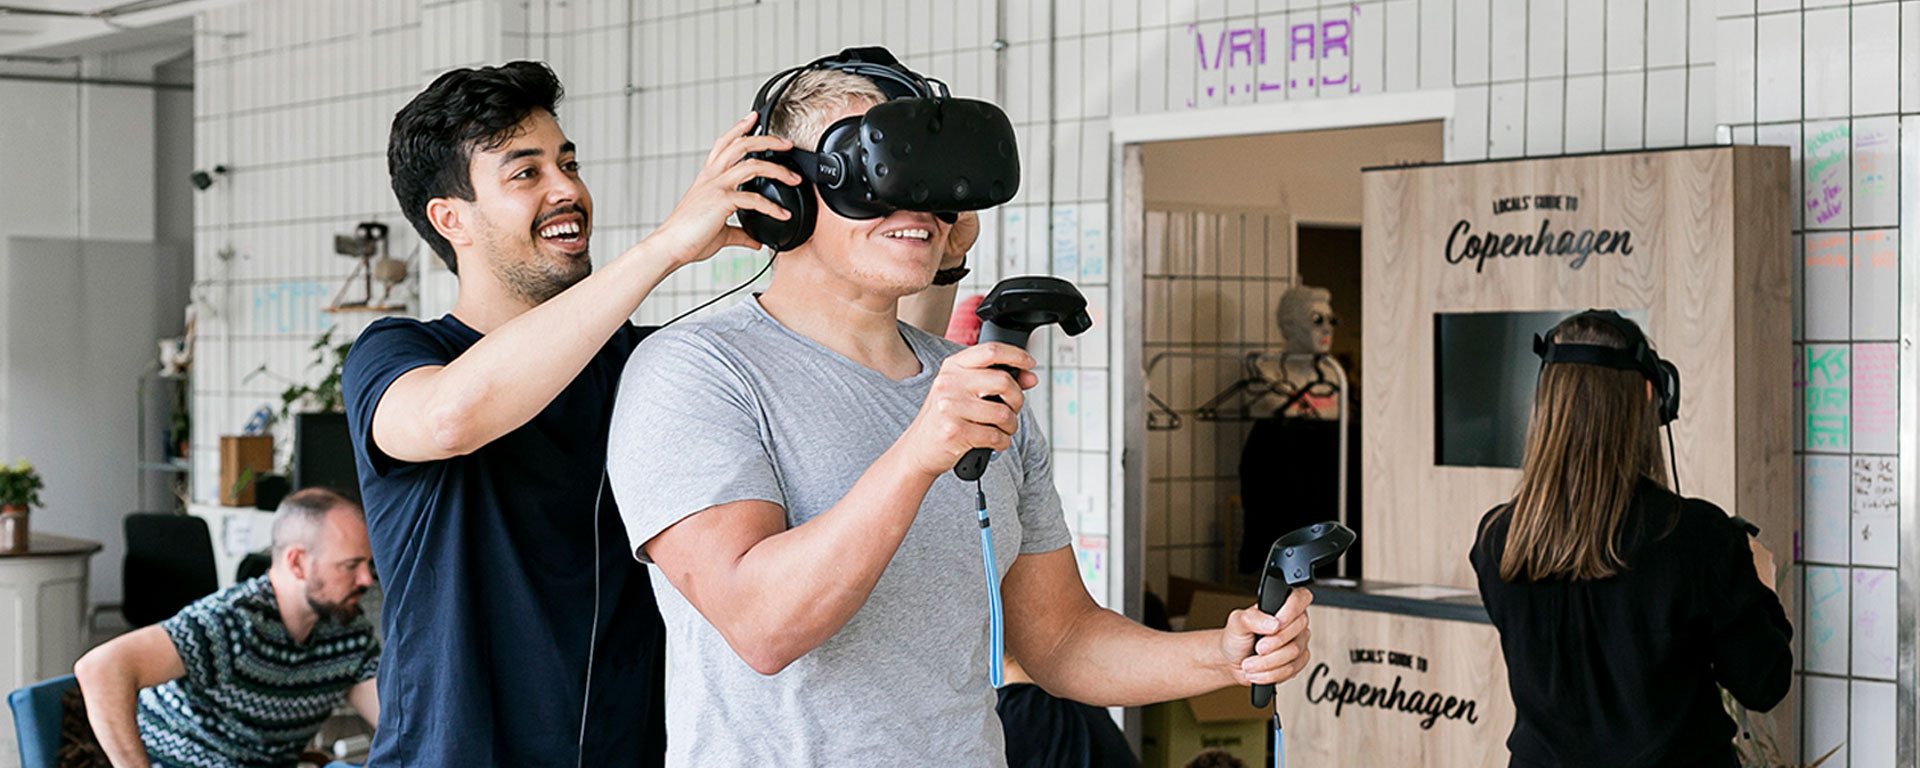 Try Virtual Reality at the heart of Copenhagen in the Meat Packing